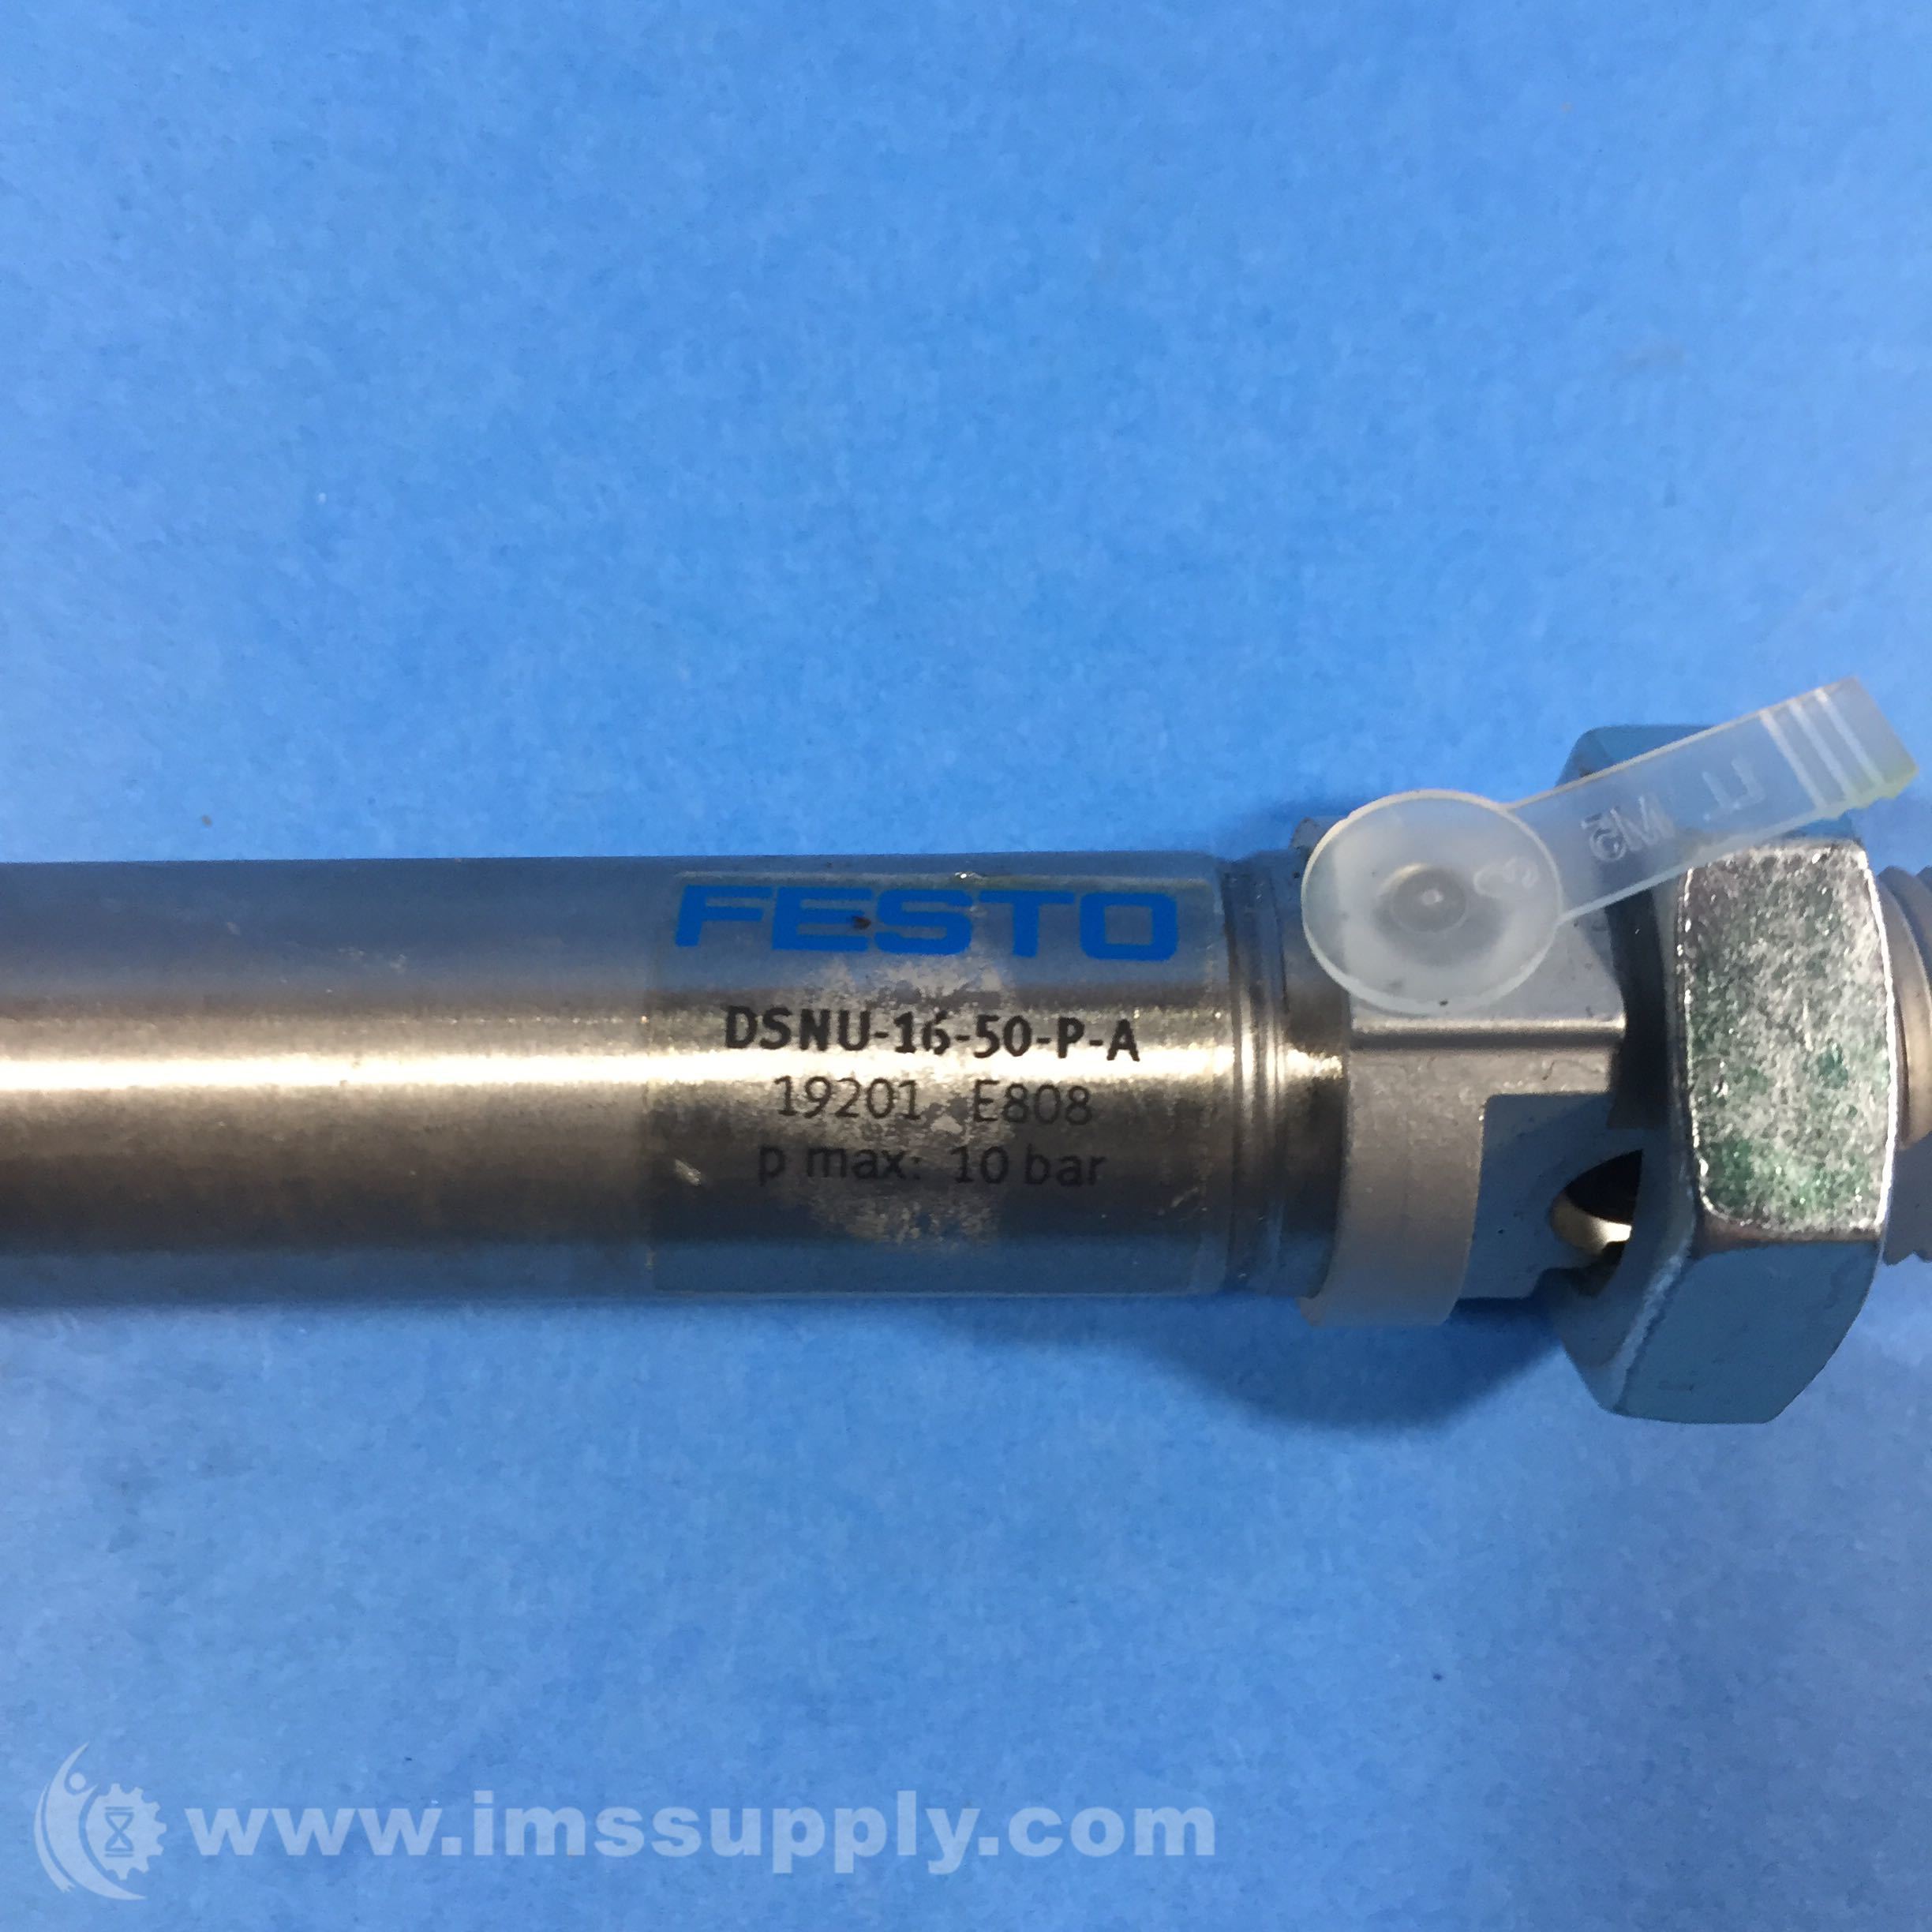 Details about   FESTO DSNU-16-50-P-A PNEUMATIC CYLINDER * USED * AS PICTURED 